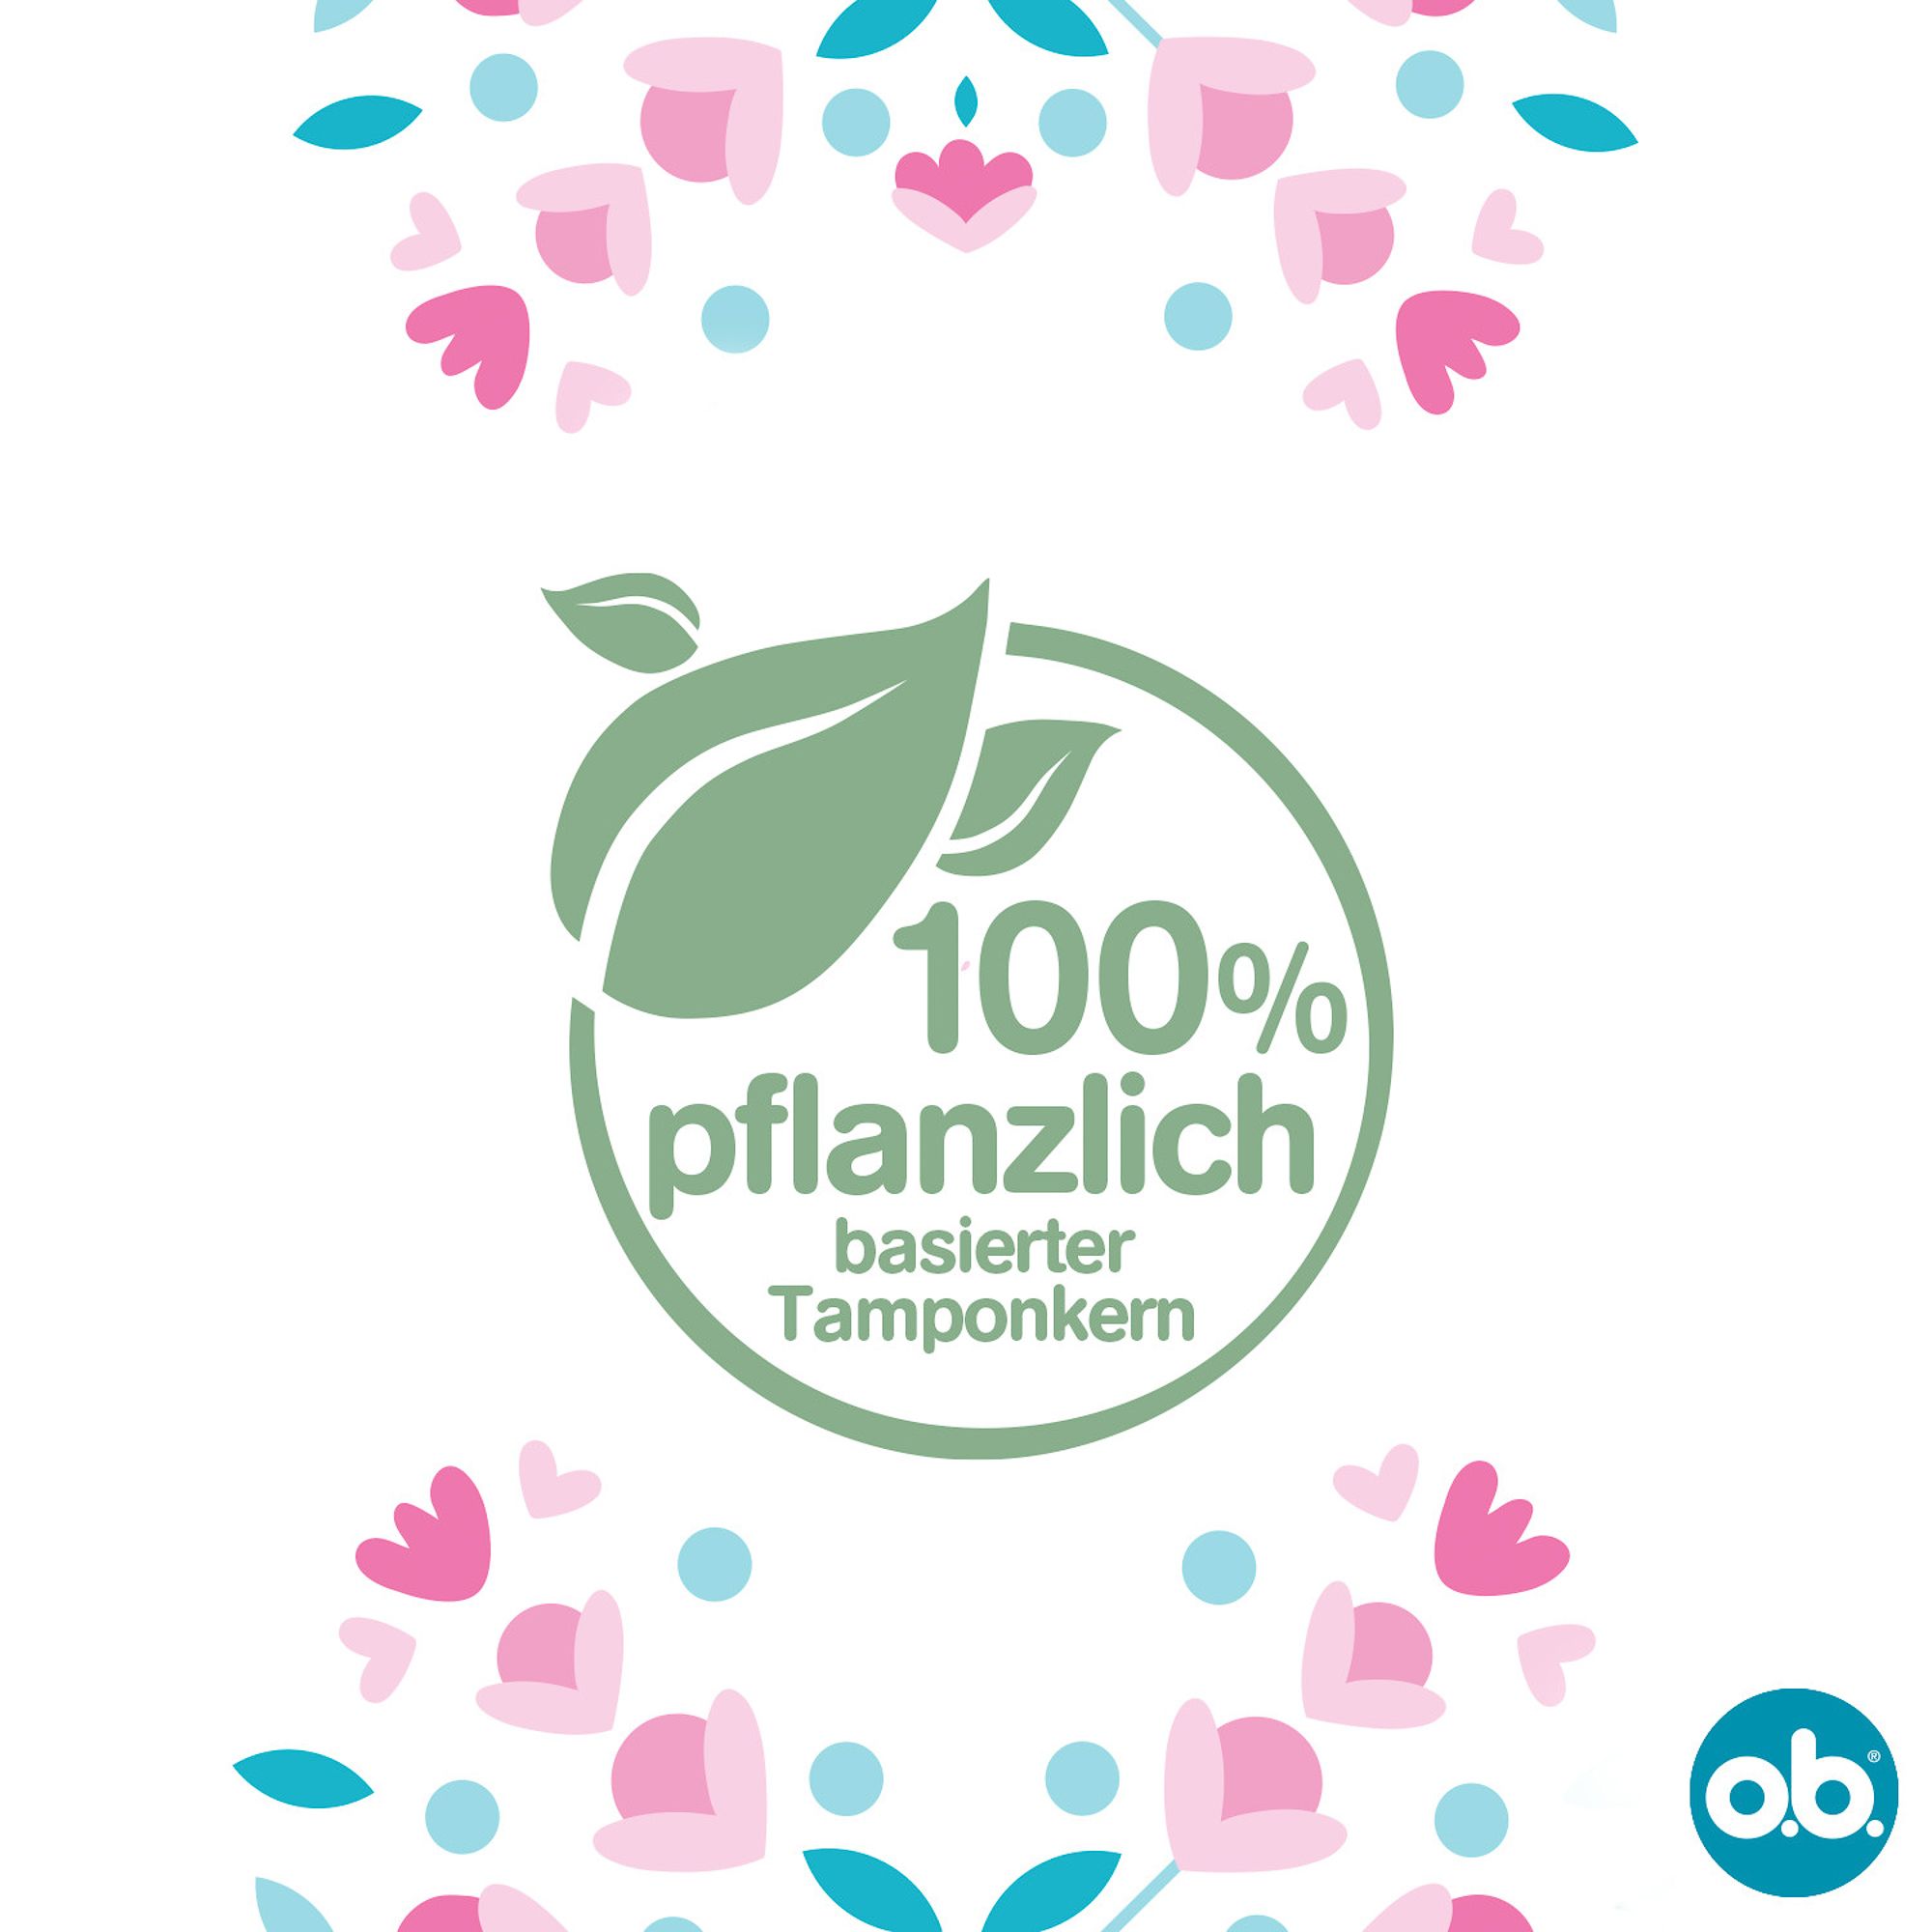 o.b. Tampons 100% pflanzlich basierter Tamponkern